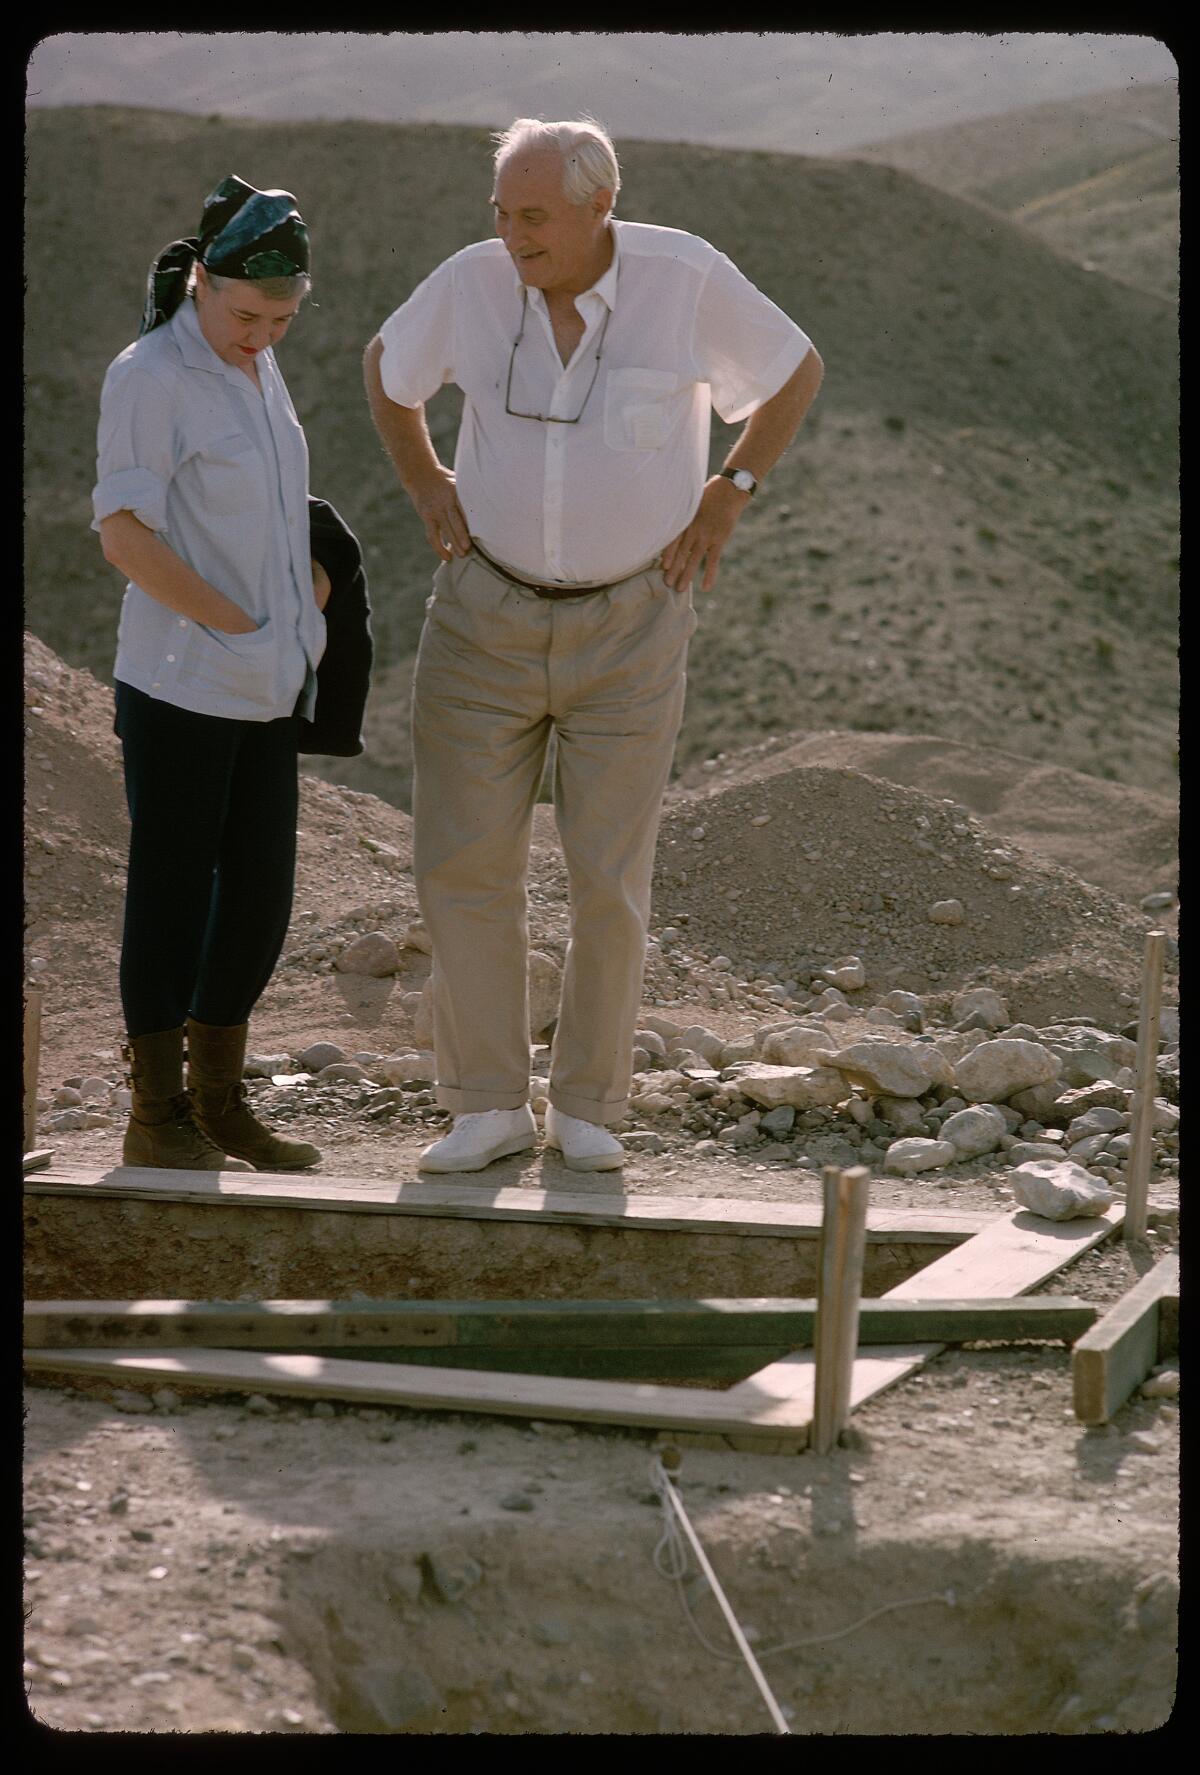 Louis Leakey took a break from his pioneering work at Olduvai Gorge in Africa to visit the Calico Early Man Site in the 1960s